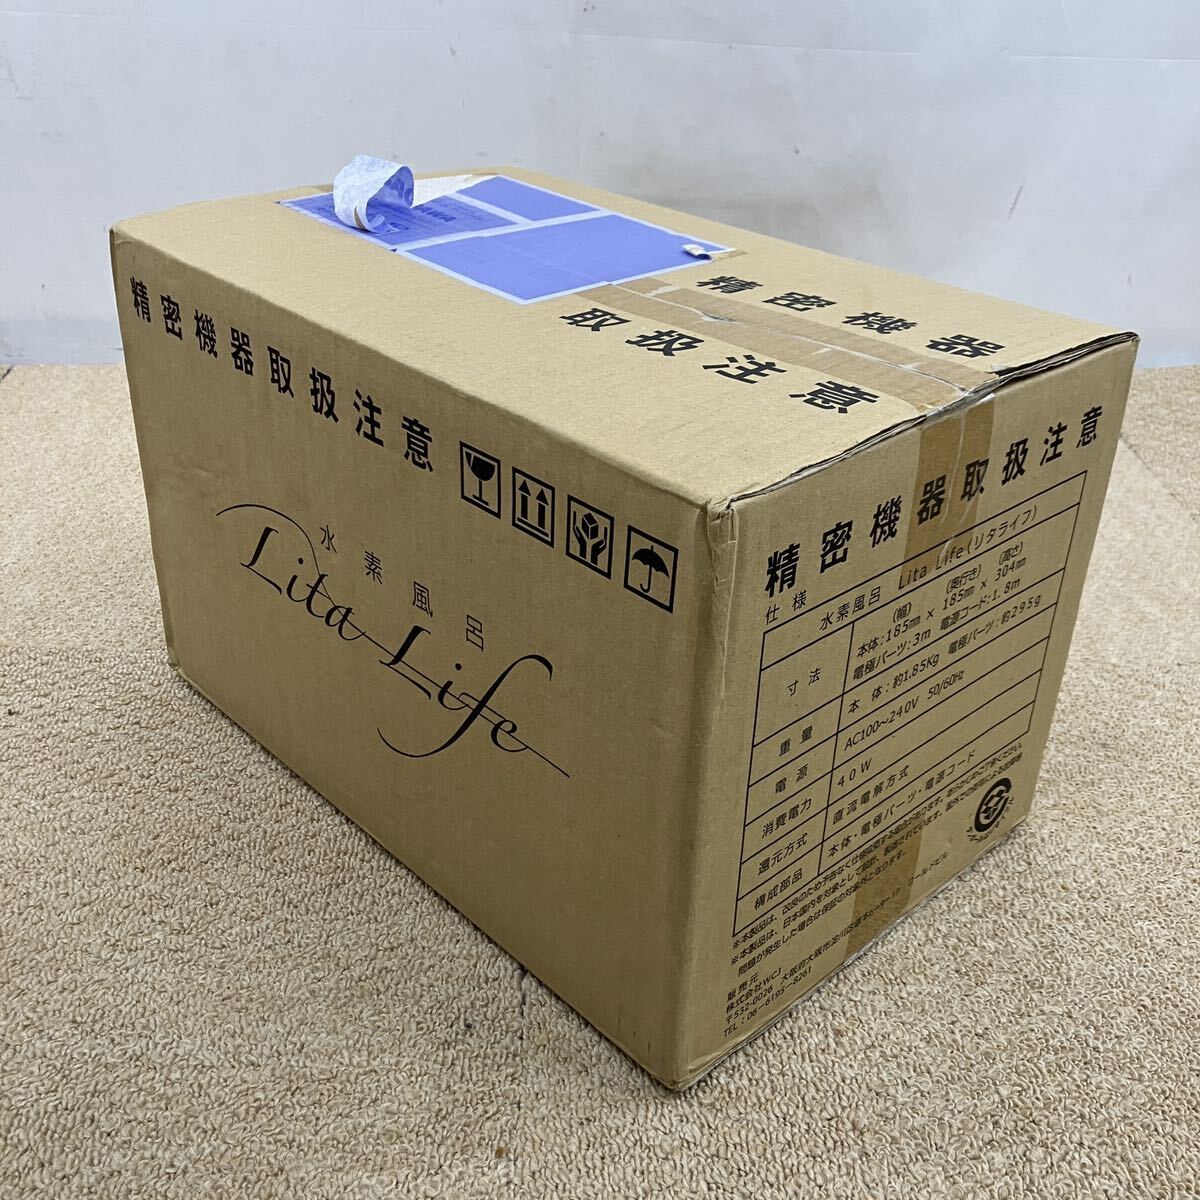 &[ selling out ] unopened!Lita Lifelita life water element bath S/N LL03003342 water element water beauty 